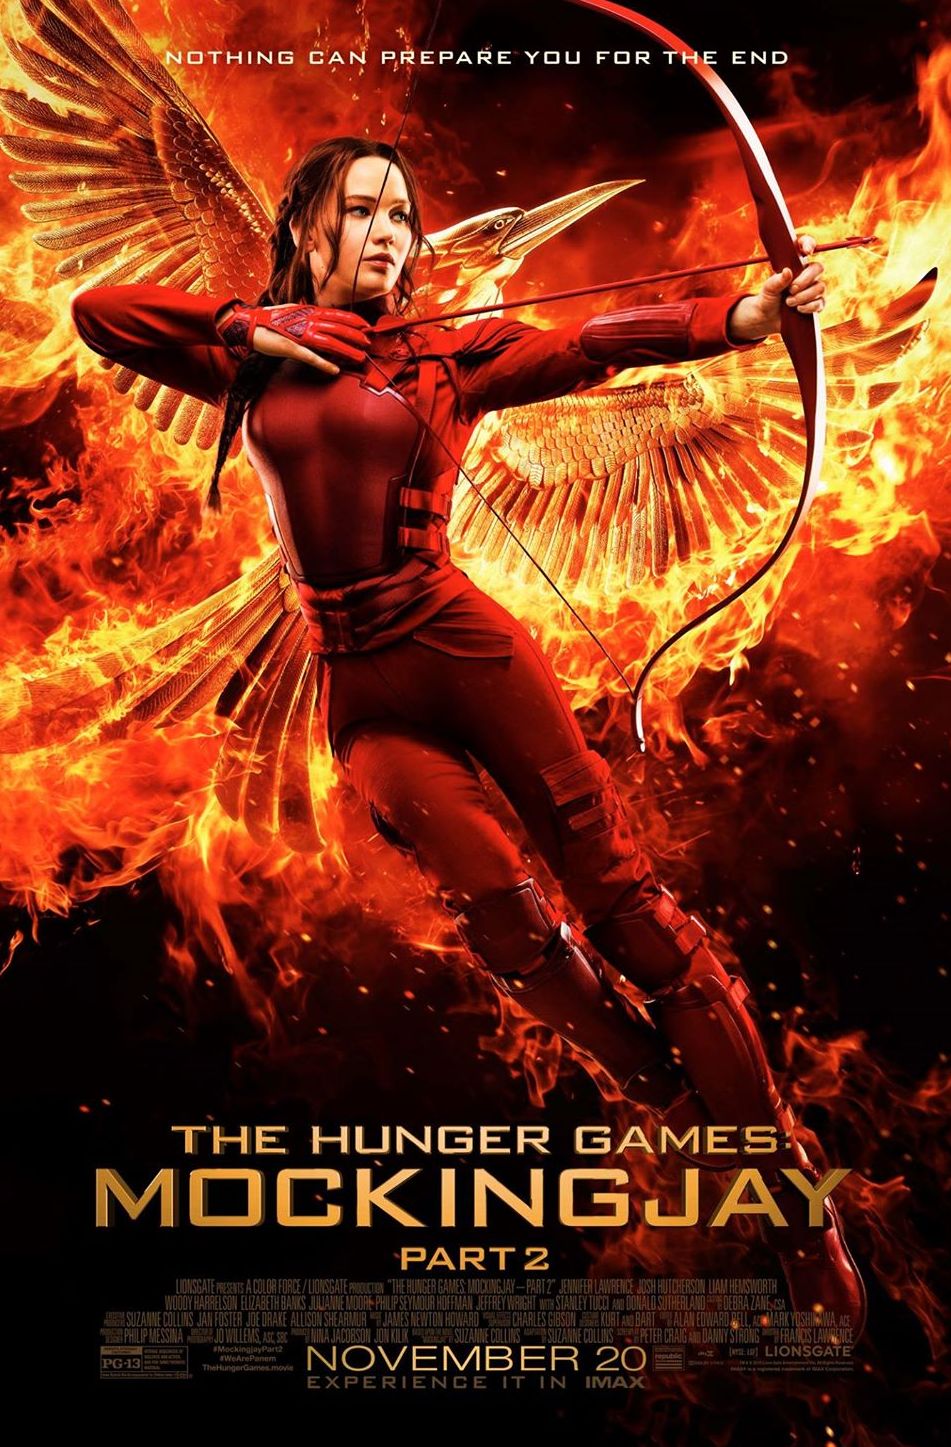 Final Poster Released for The Hunger Games: Mockingjay Part 